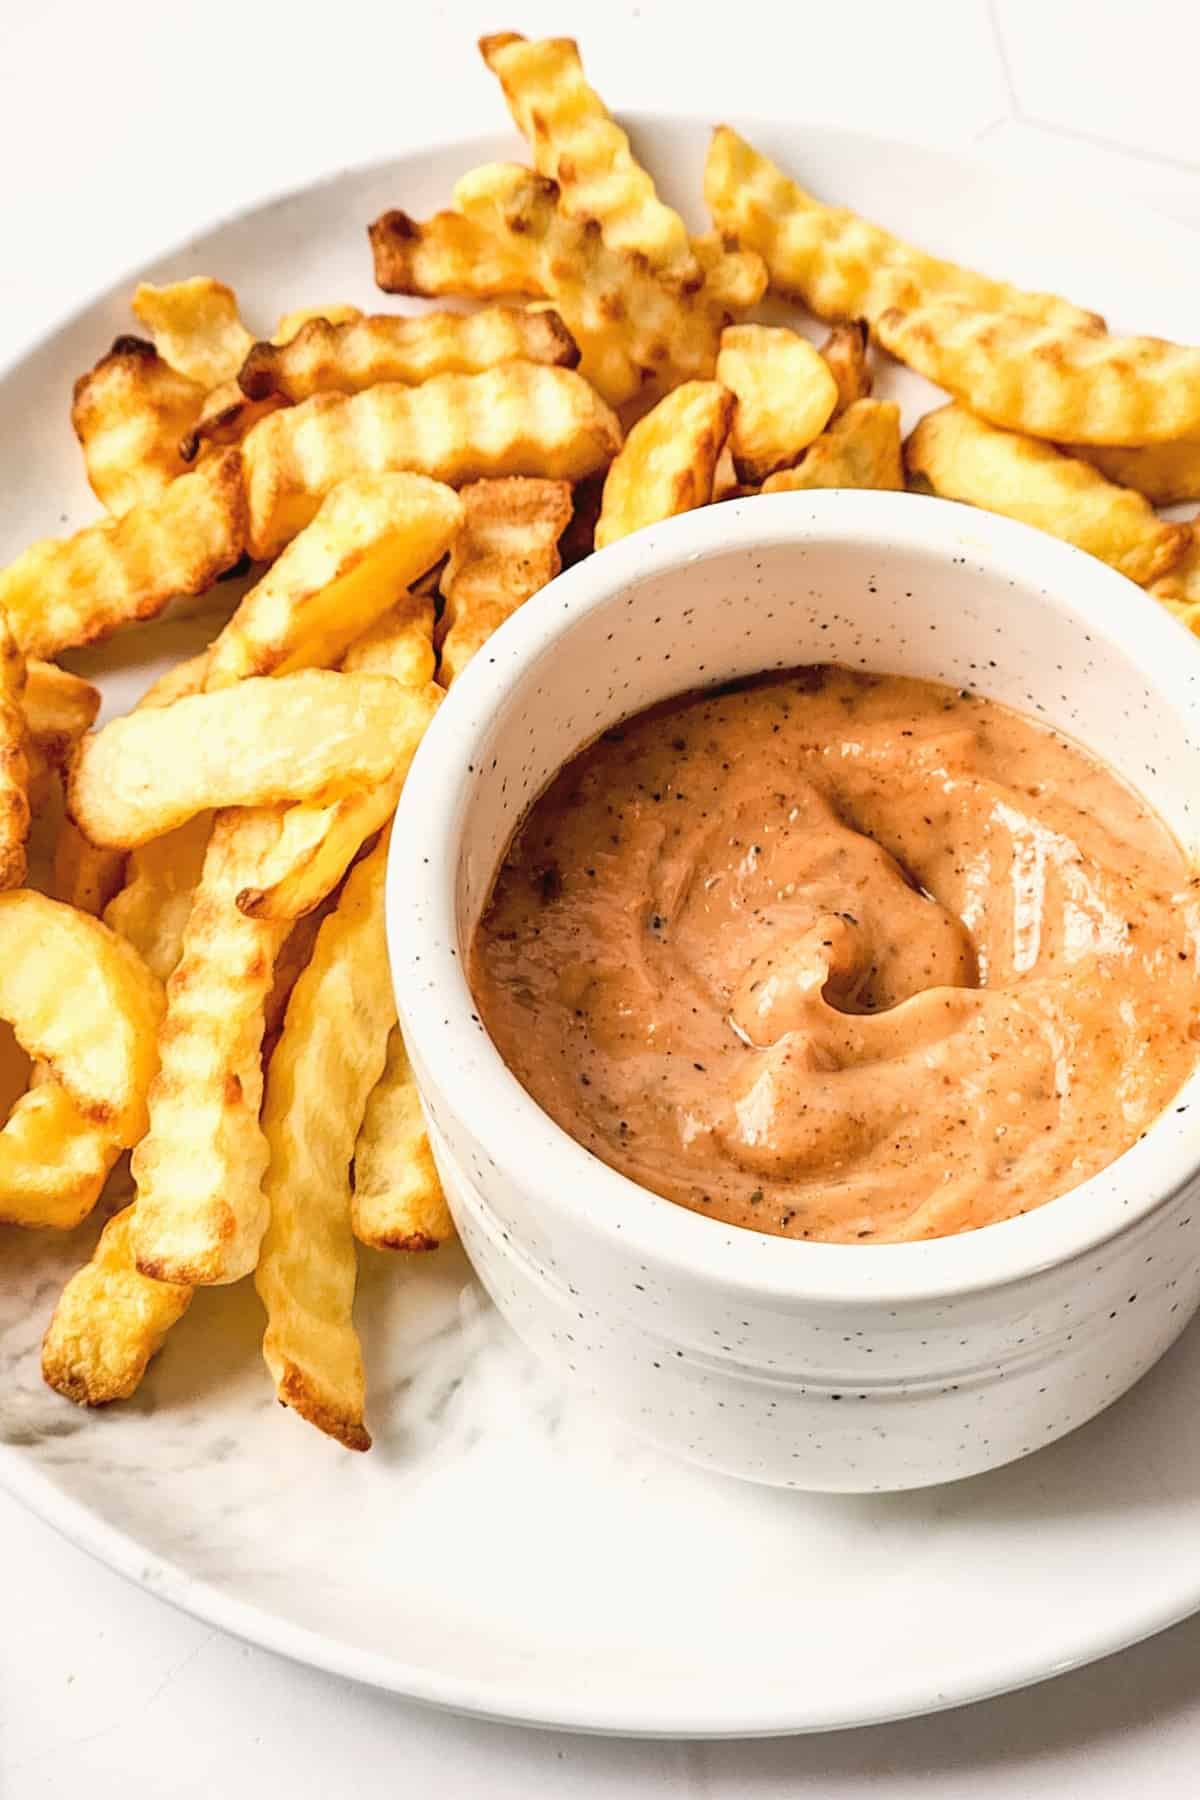 A small bowl of dipping sauce and fries on a white plate.